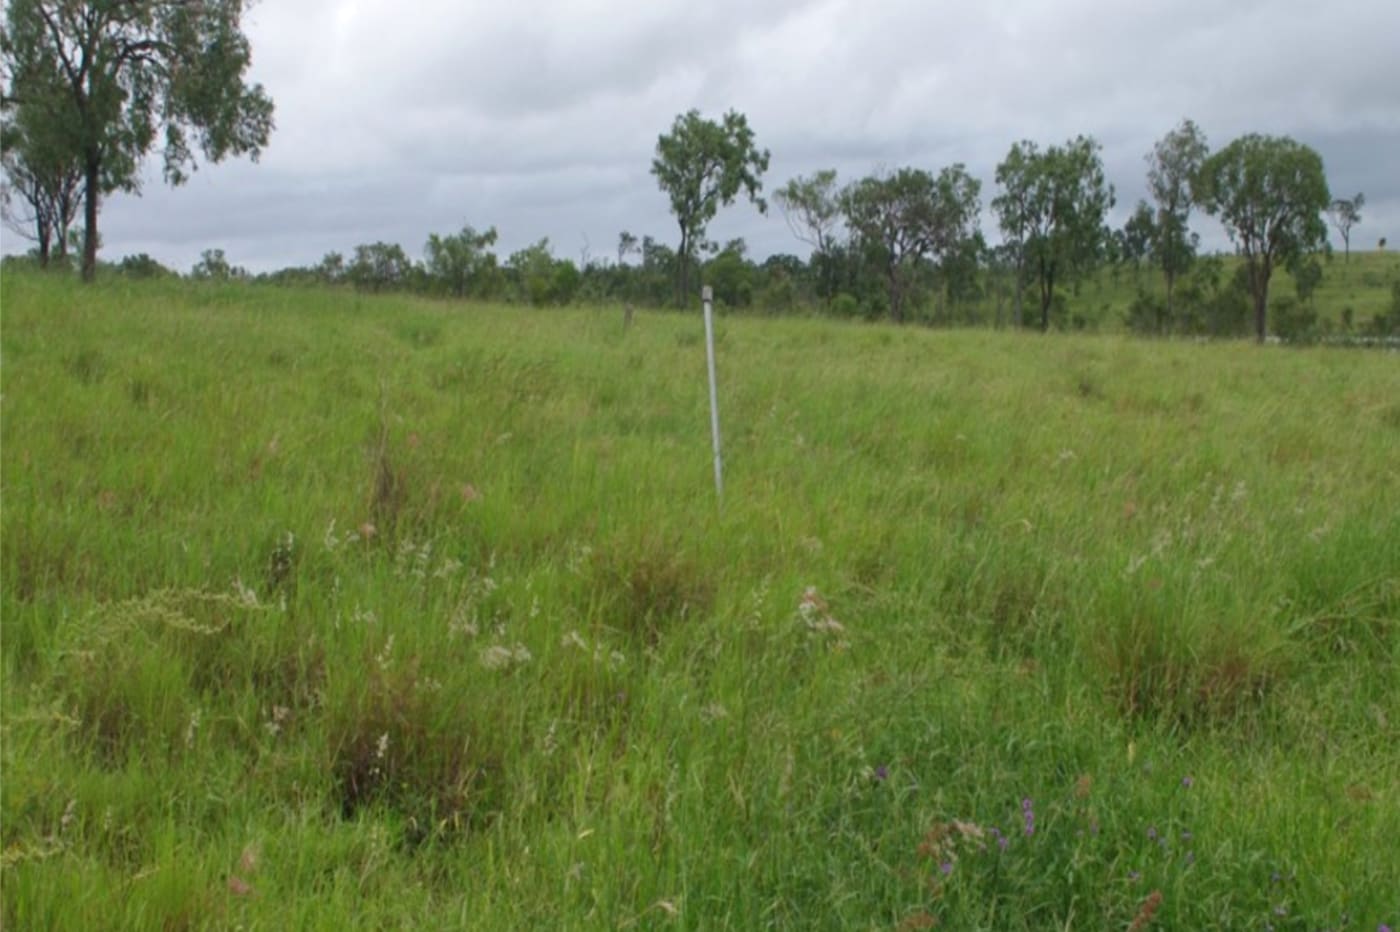 Paddock on a property near Rockhampton in 2006 before the use of regenerative grazing techniques